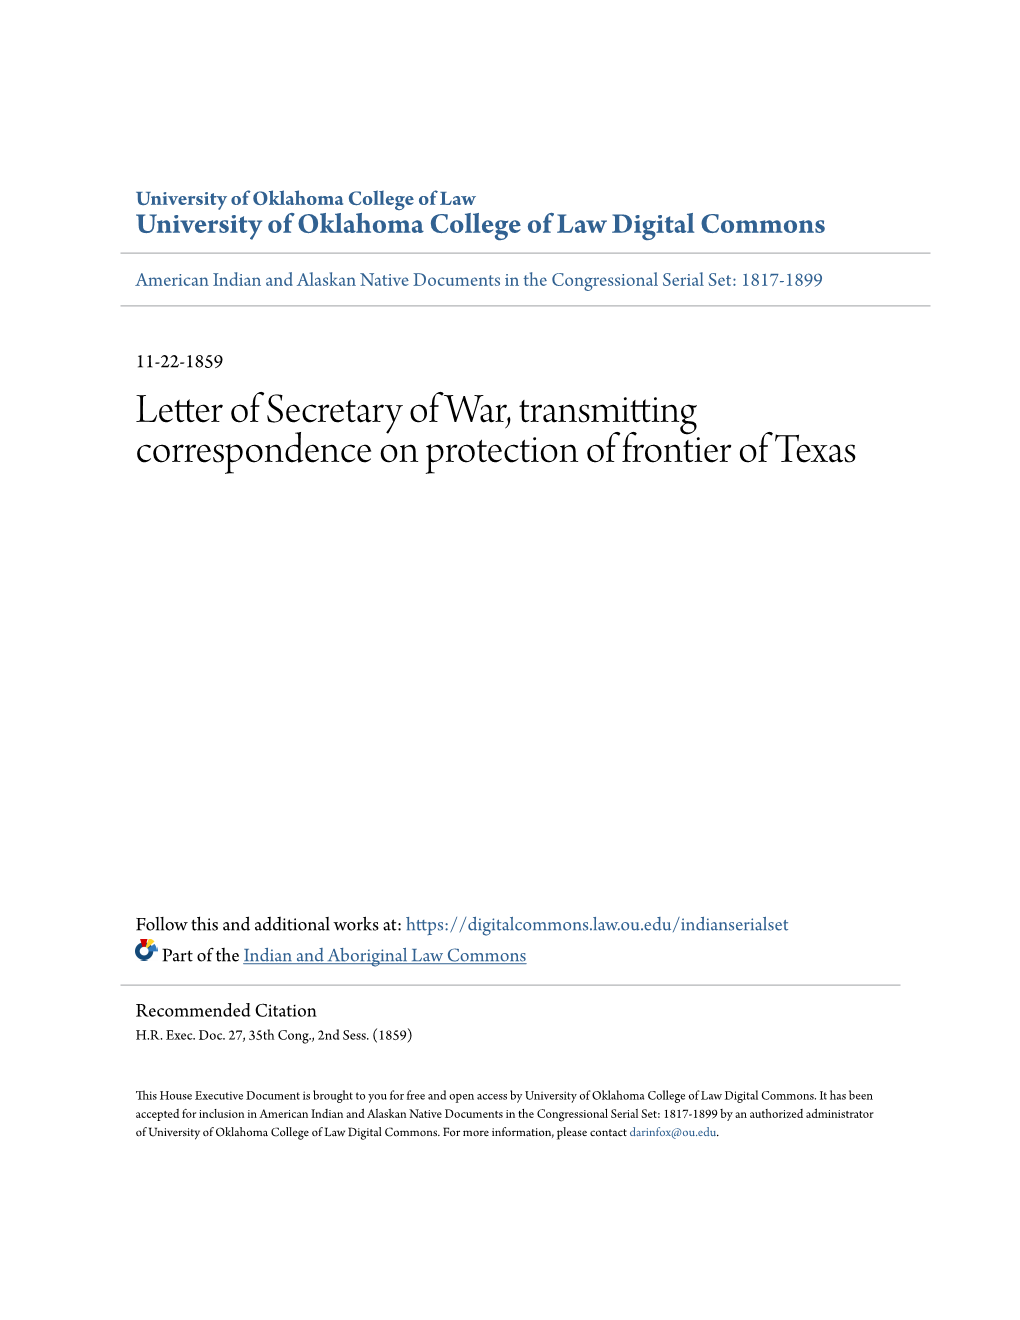 Letter of Secretary of War, Transmitting Correspondence on Protection of Frontier of Texas